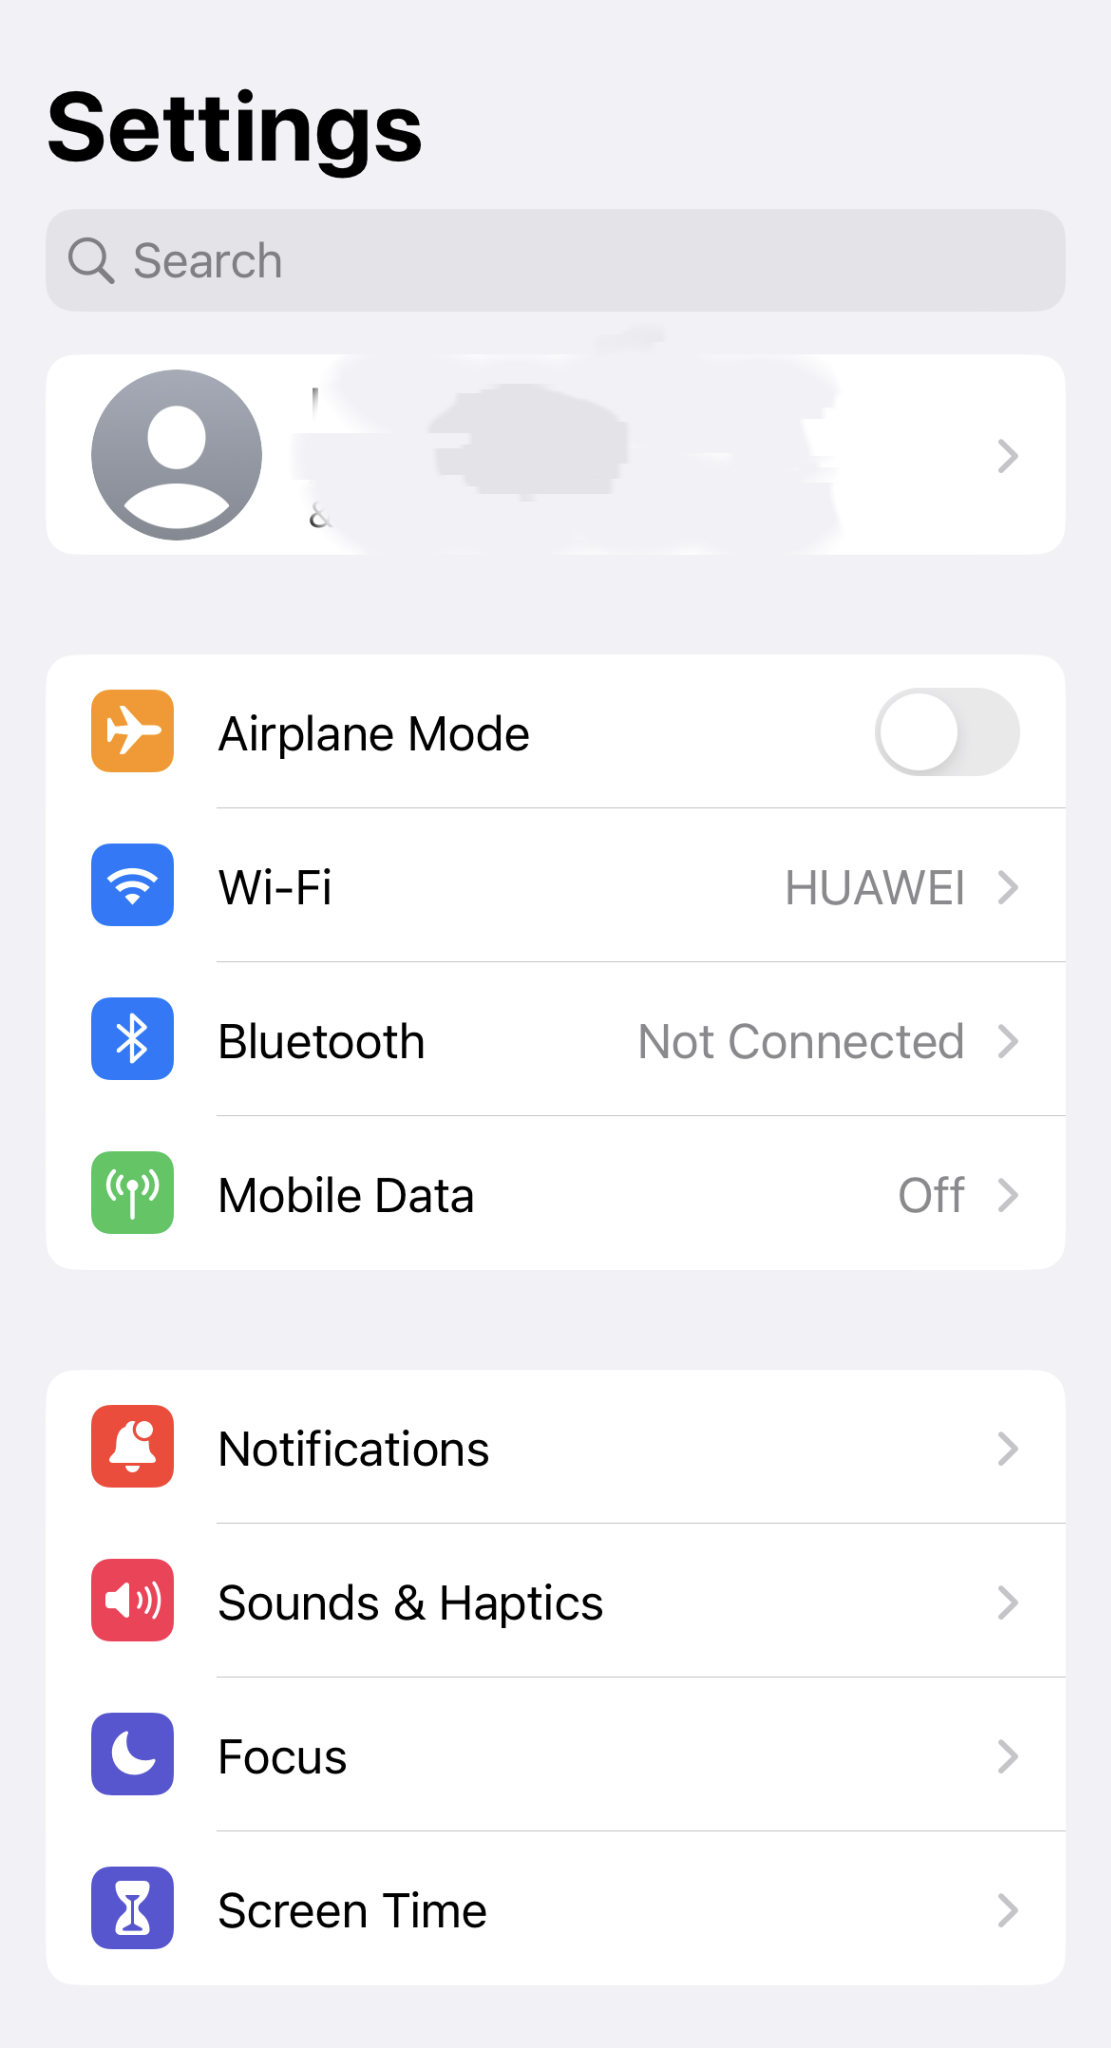 Open Settings on your iPhone